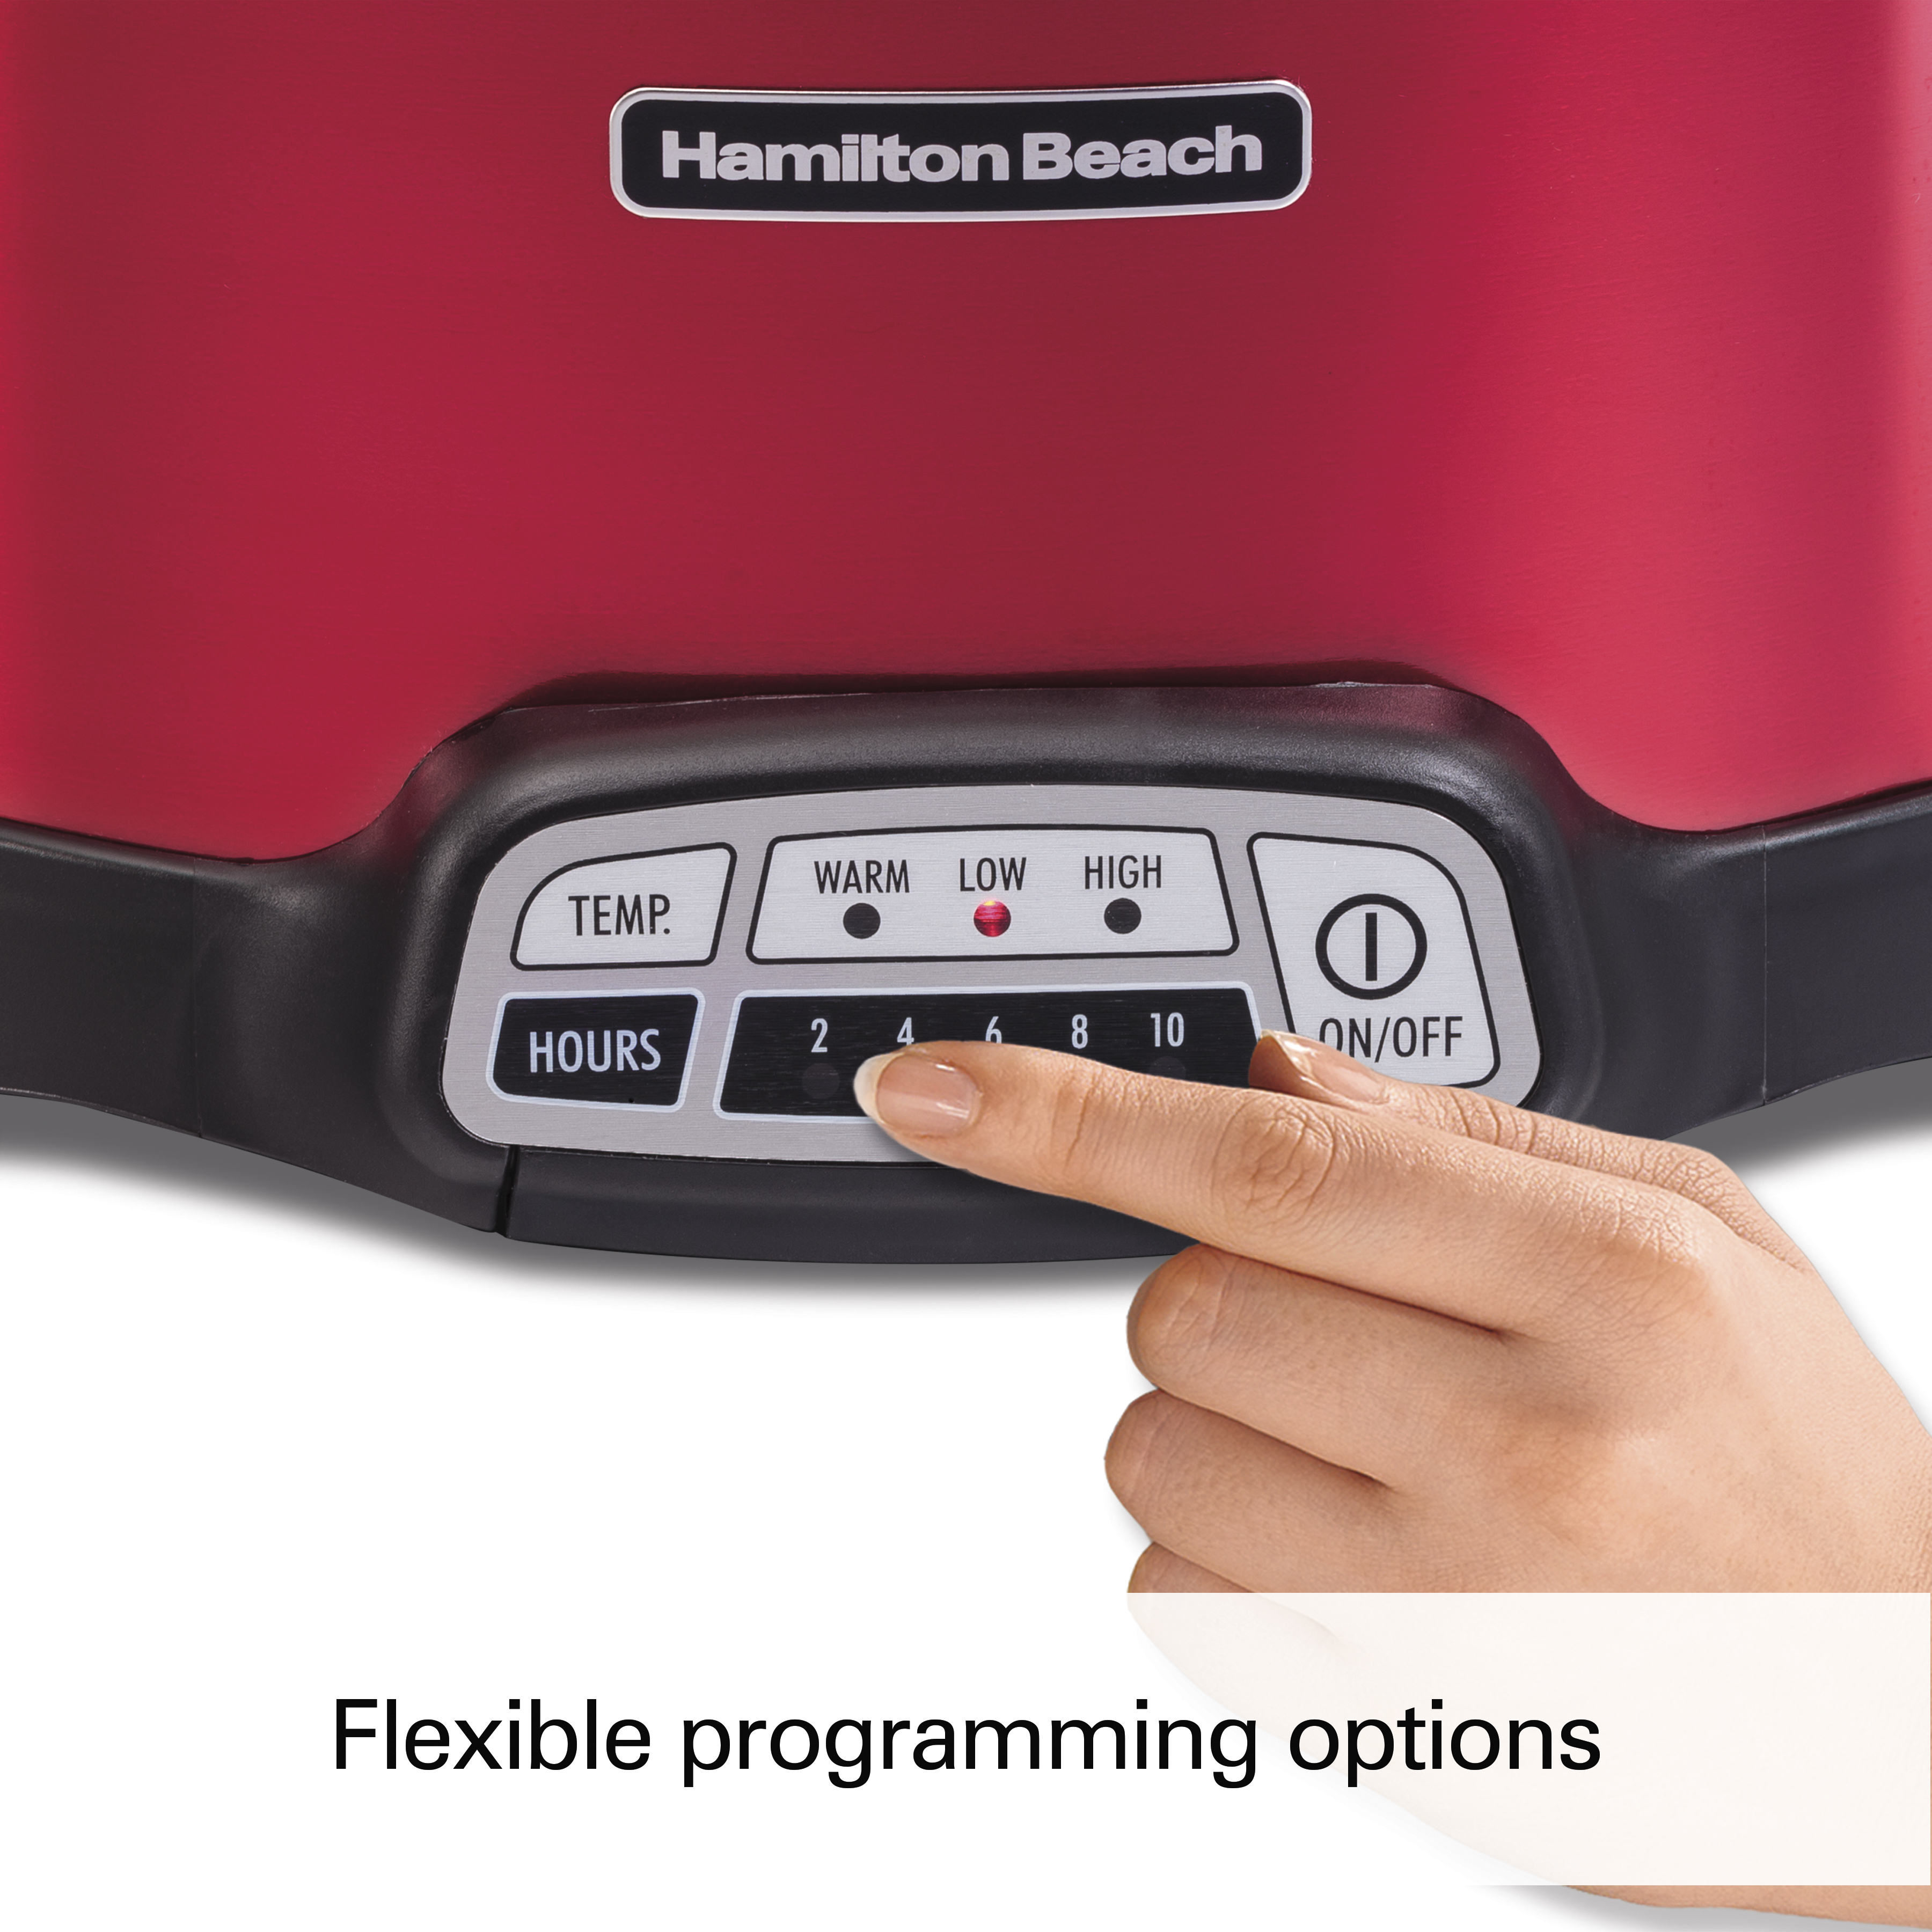 Hamilton Beach Stay or Go Programmable Slow Cooker with Party Dipper, 7 Quart Capacity,Removable Crock, Red, 33478 - image 5 of 8